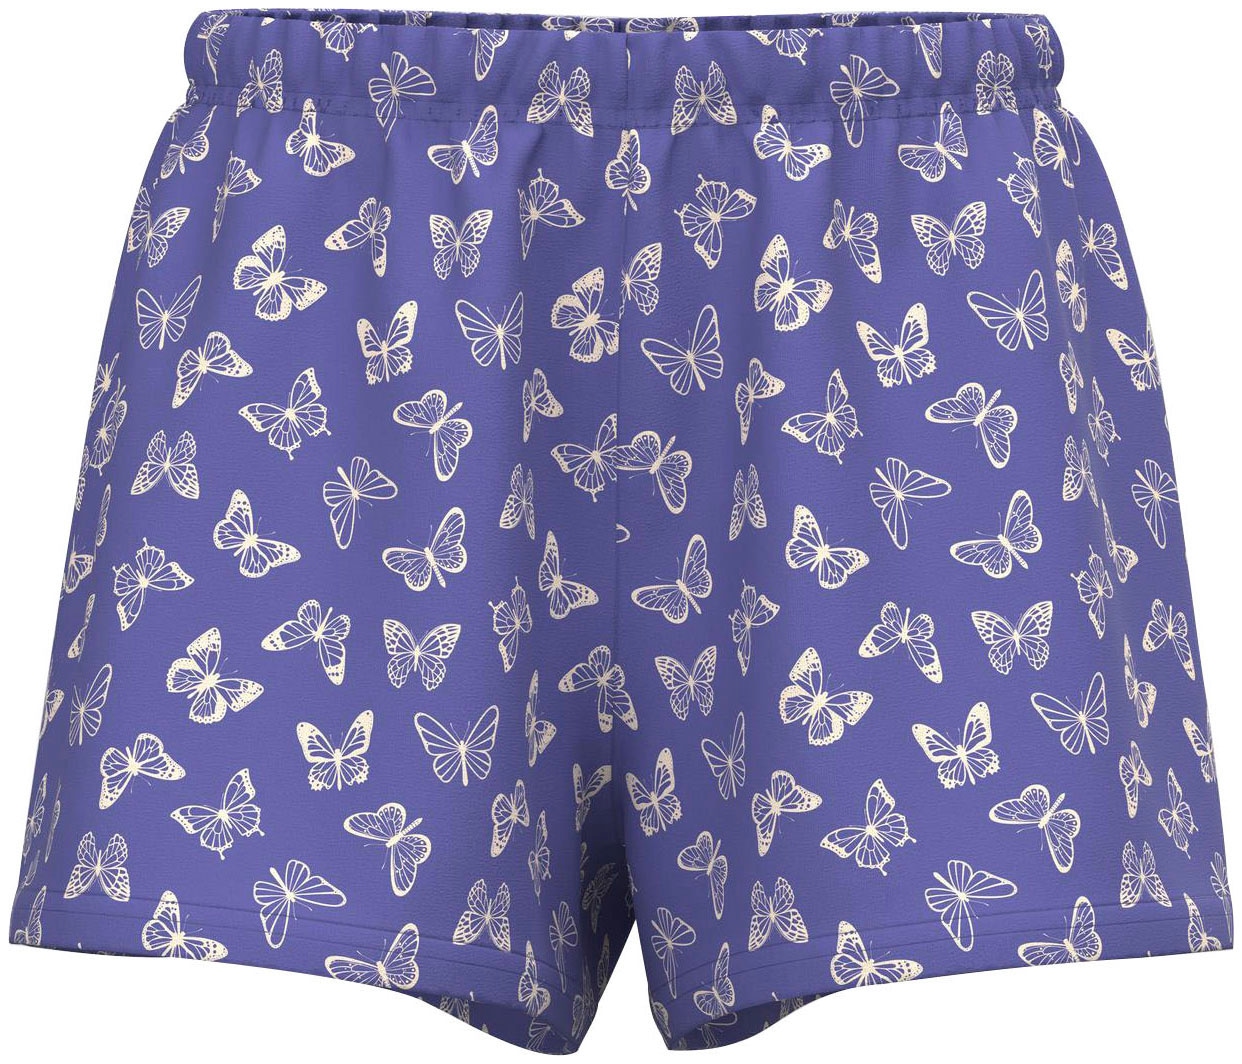 bei Name Shorty mit BUTTERFLY tlg.), OTTO »NKFNIGHTSET Schmetterling Druck 2 NOOS«, CAP (Packung, It